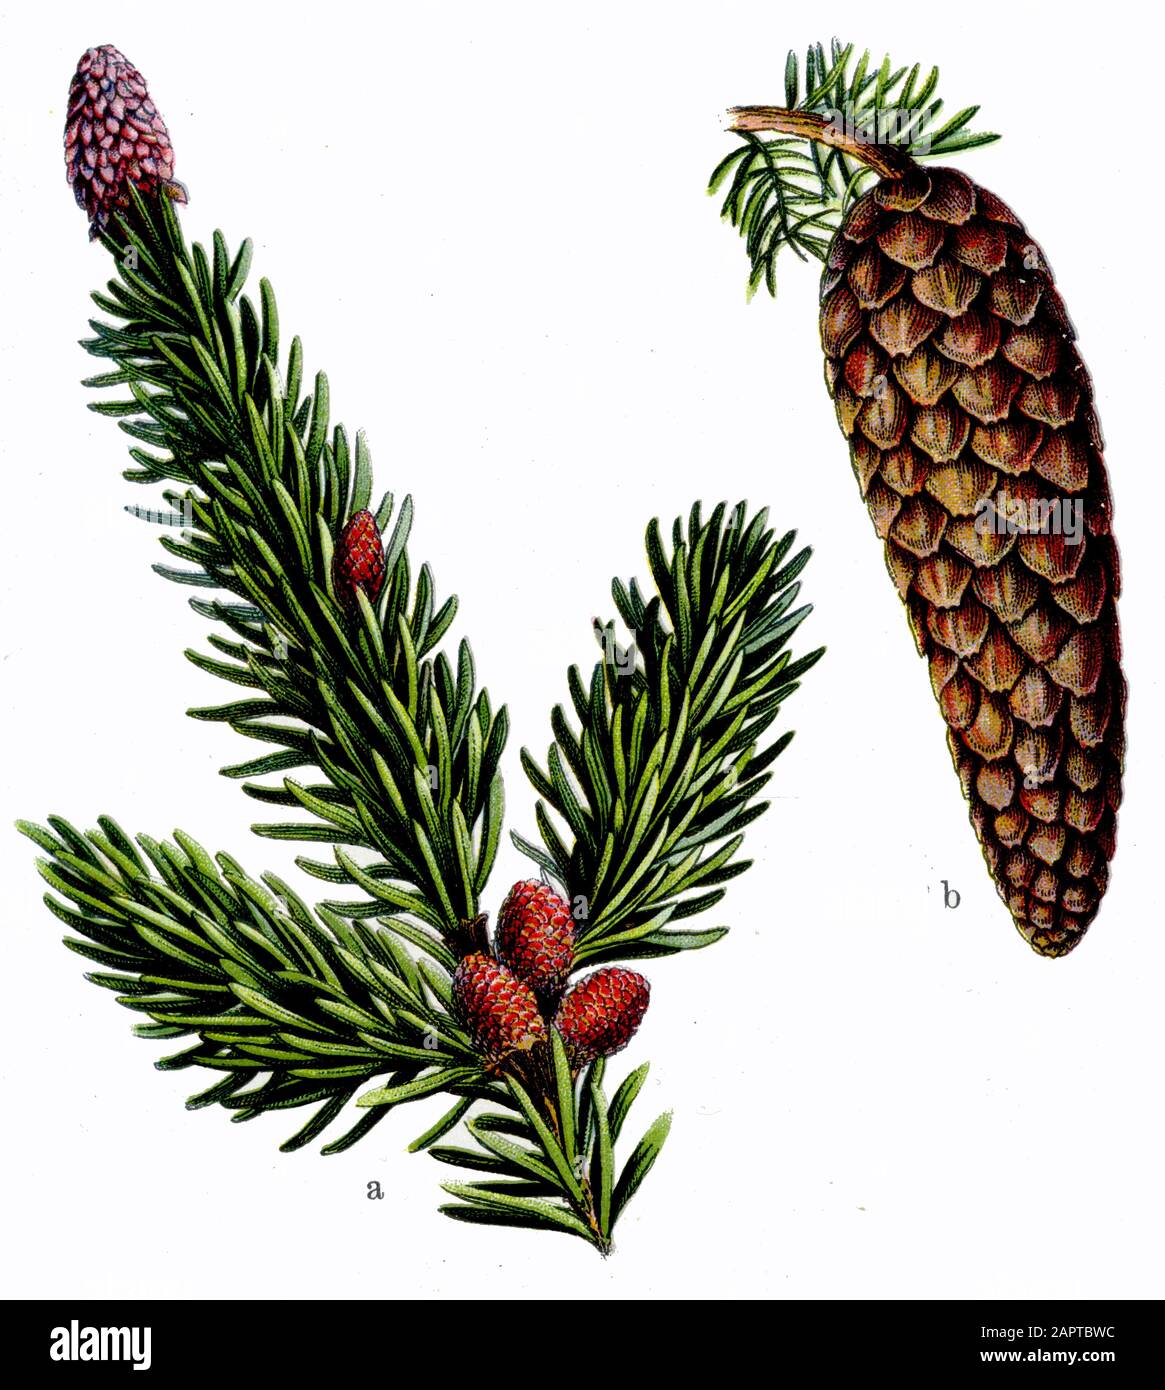 Norway spruce, European spruce Picea abies,  (botany book, 1909) Stock Photo